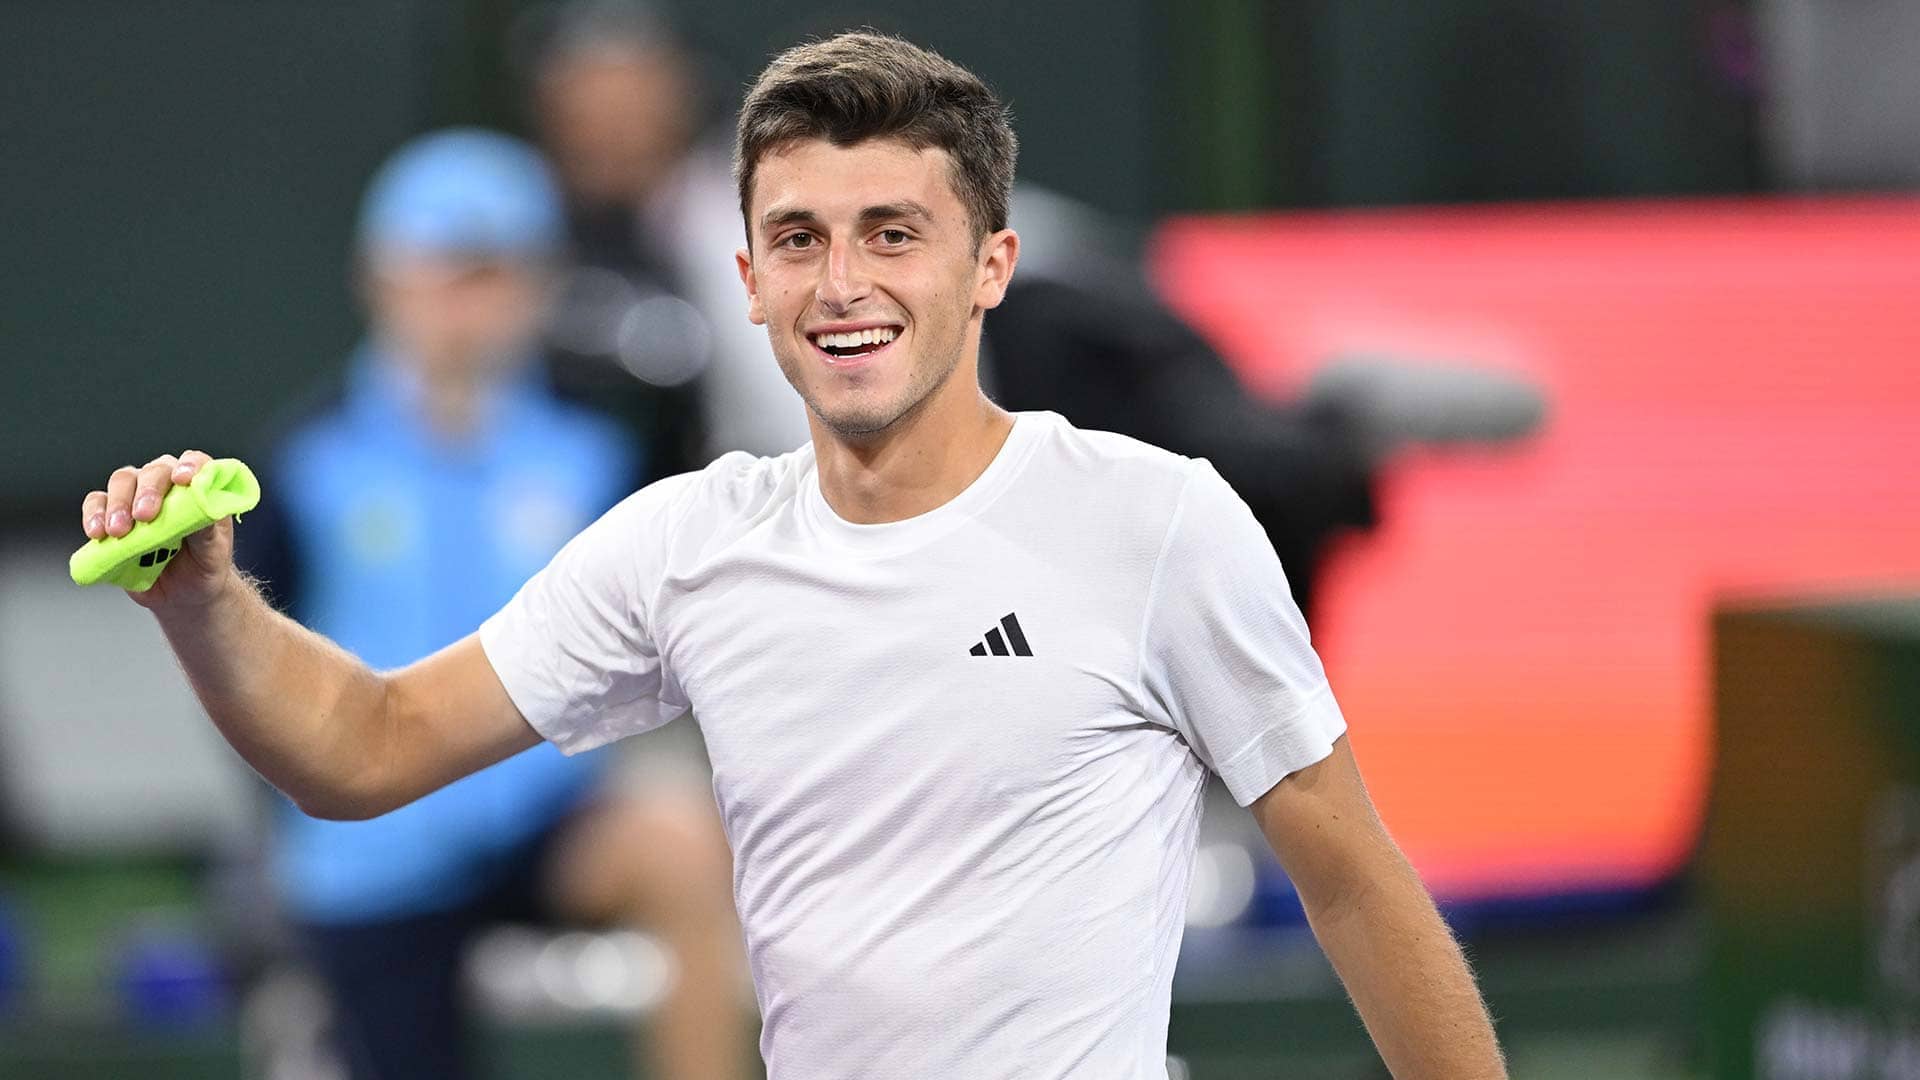 Luca Nardi, World No. 123, is the lowest-ranked player to defeat Novak Djokovic at ATP Masters 1000 or Grand Slam level.